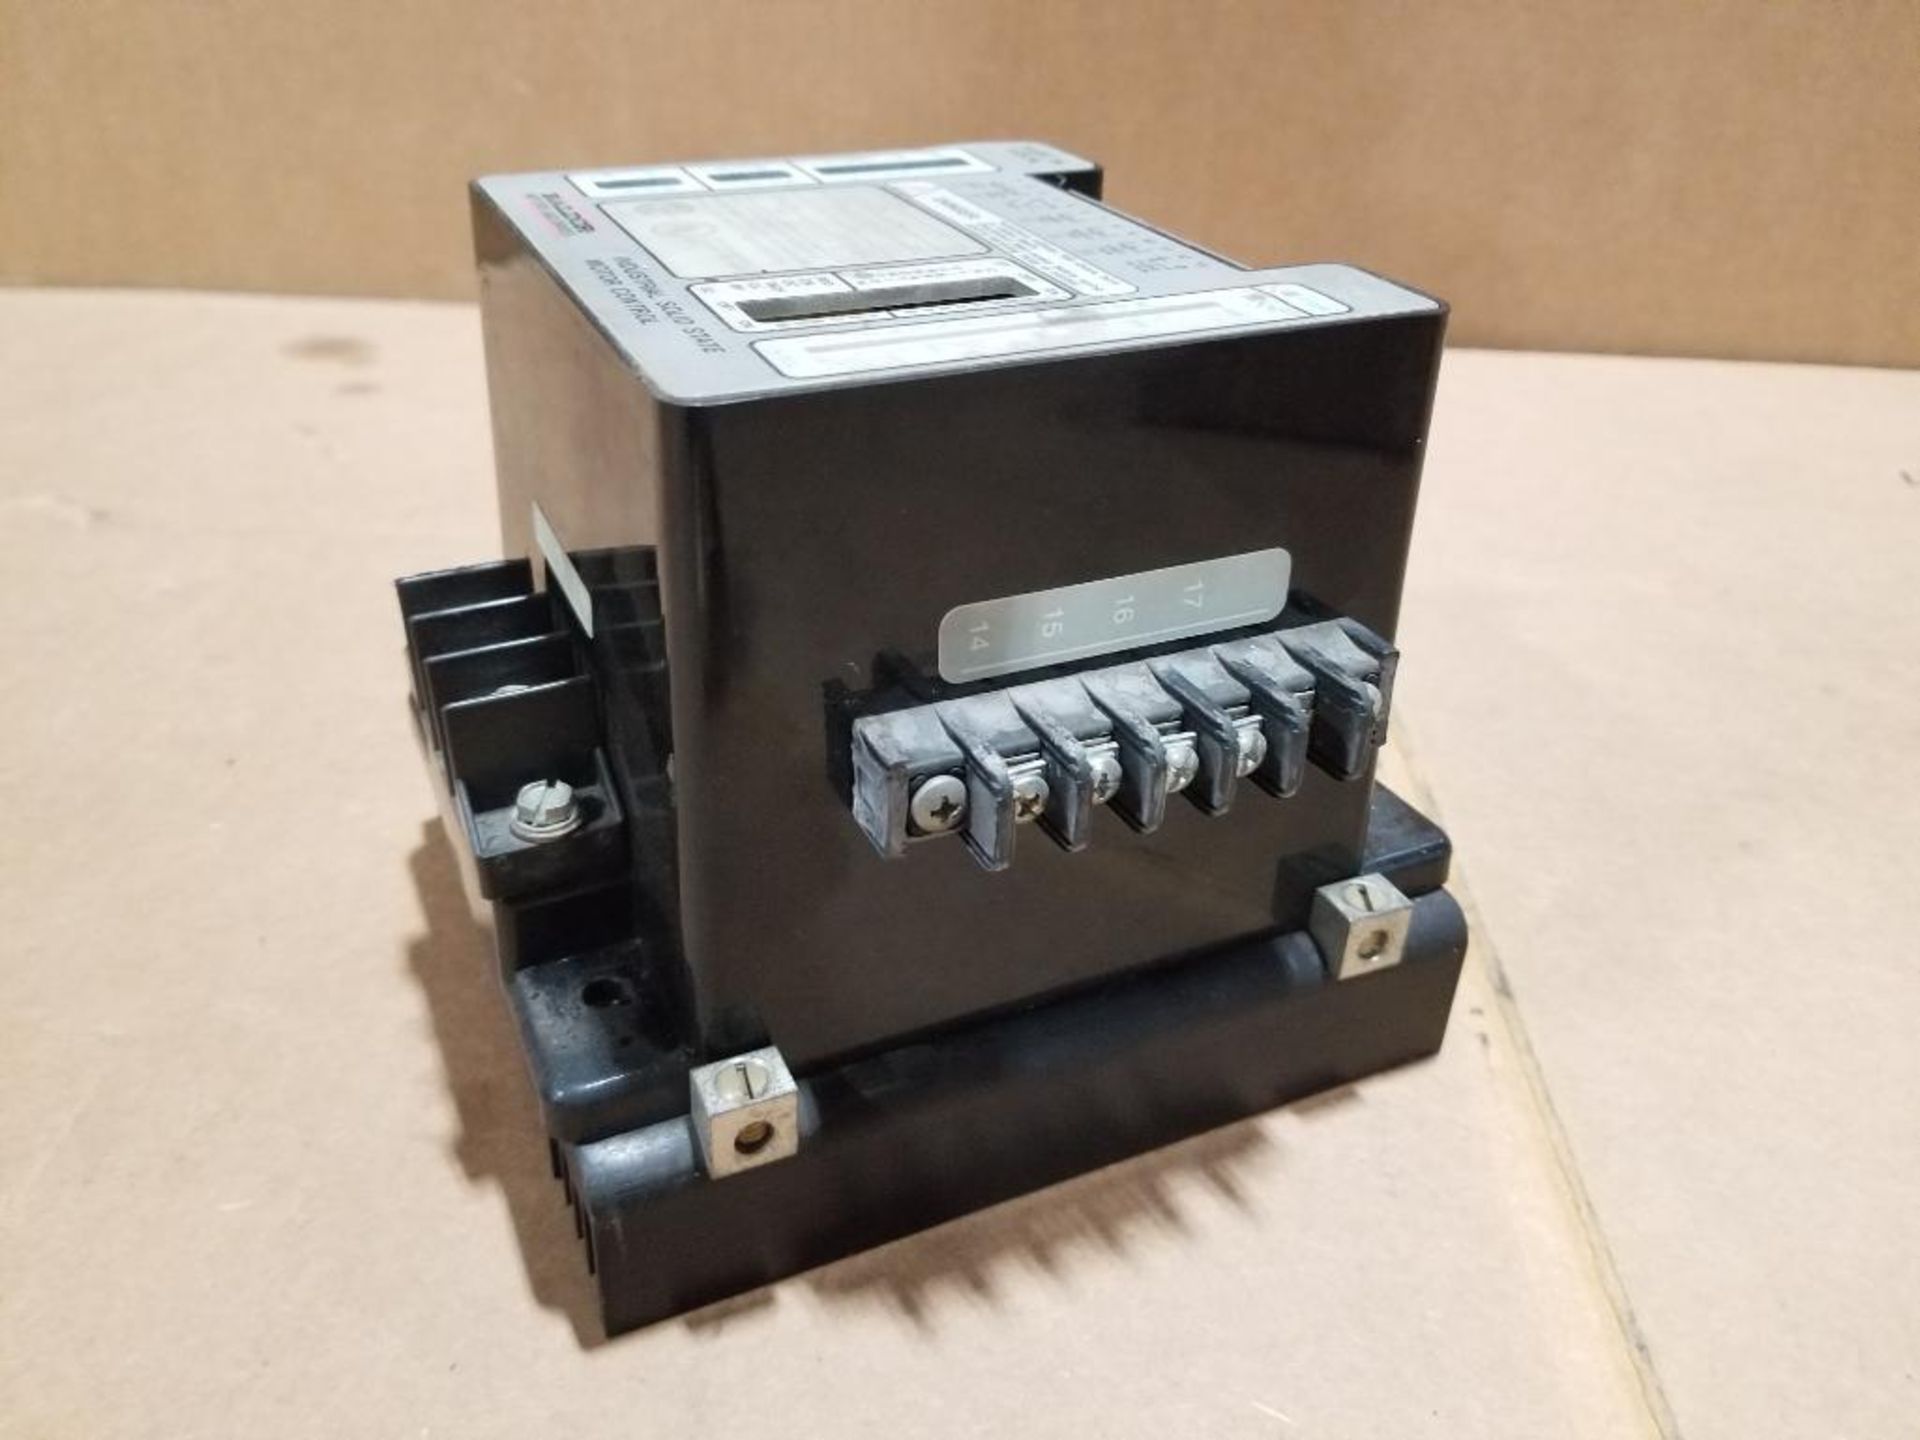 Baldor motors and drives. Industrial Solid State Motor Control. Catalog MA7008. - Image 3 of 6